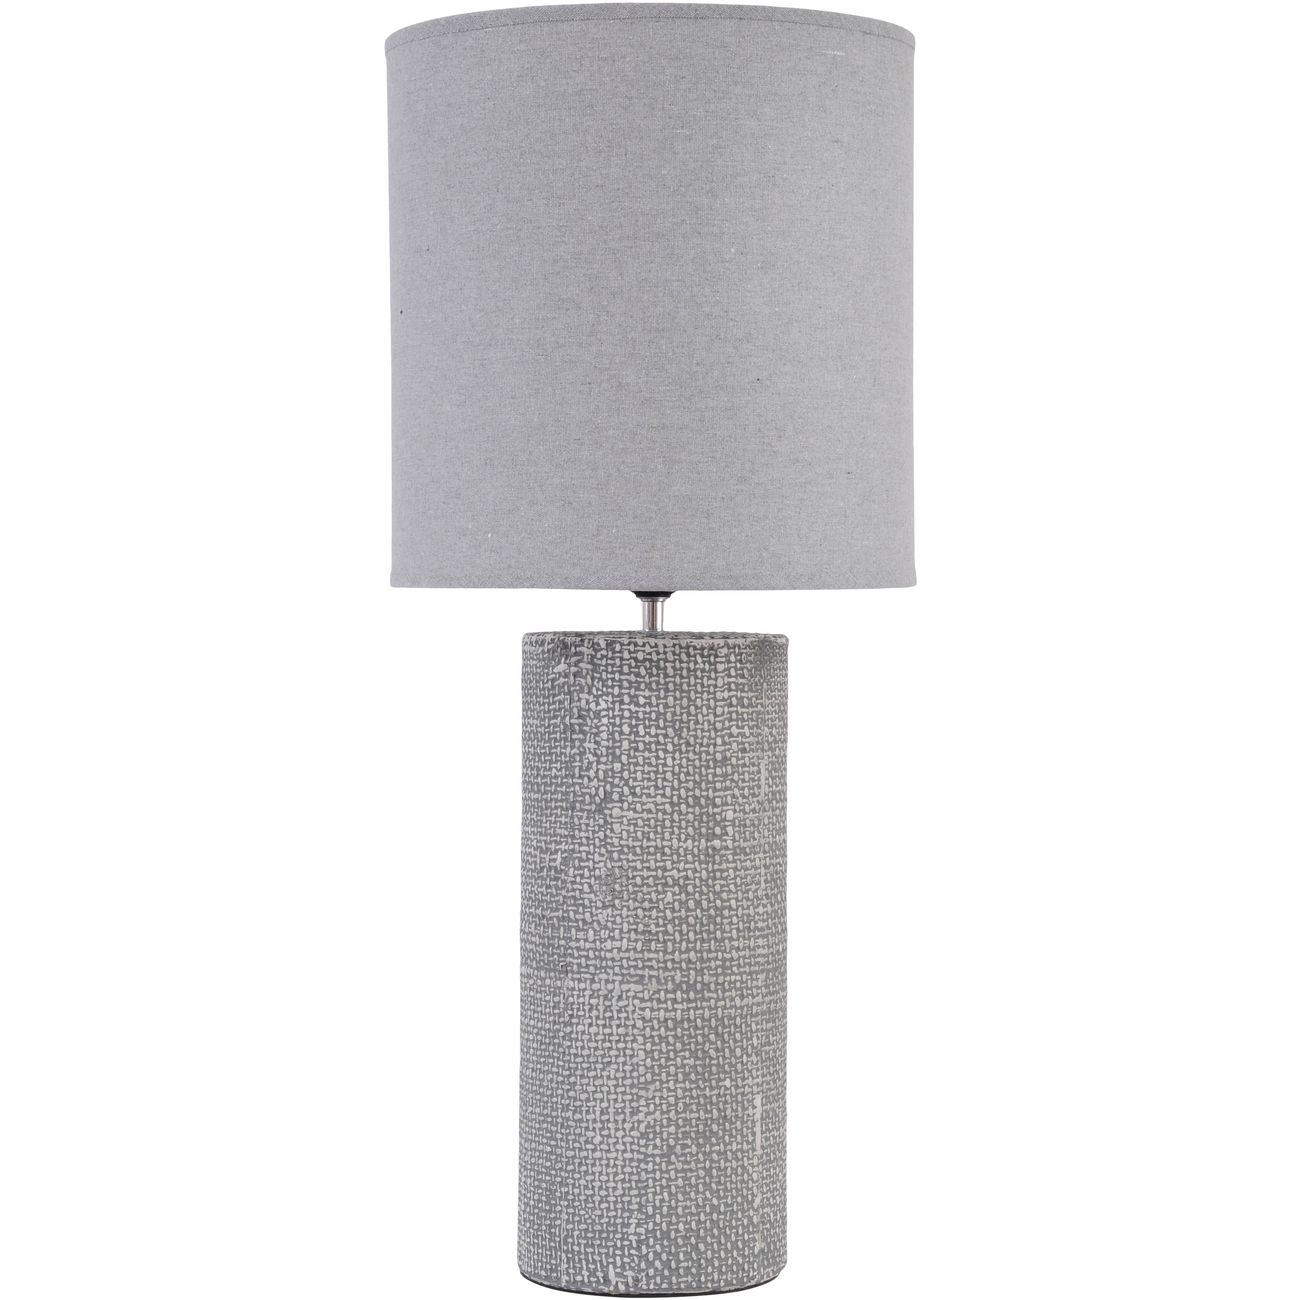 Textured Porcelain Lamp with Shade